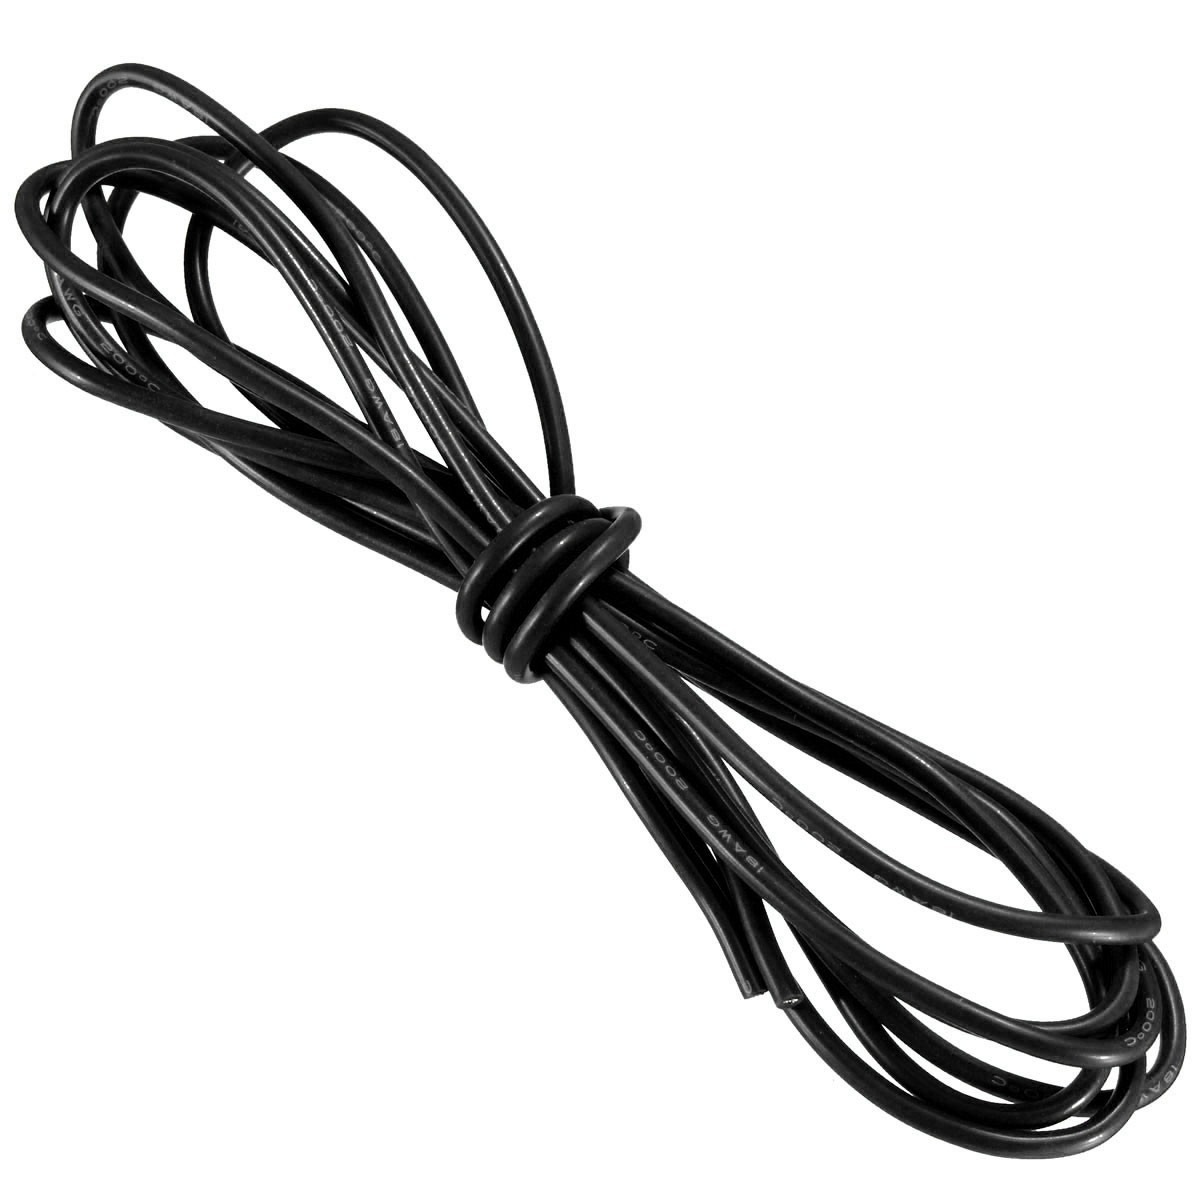 DANIU-2-Meter-Black-Silicone-Wire-Cable-10121416182022AWG-Flexible-Cable-1170287-2